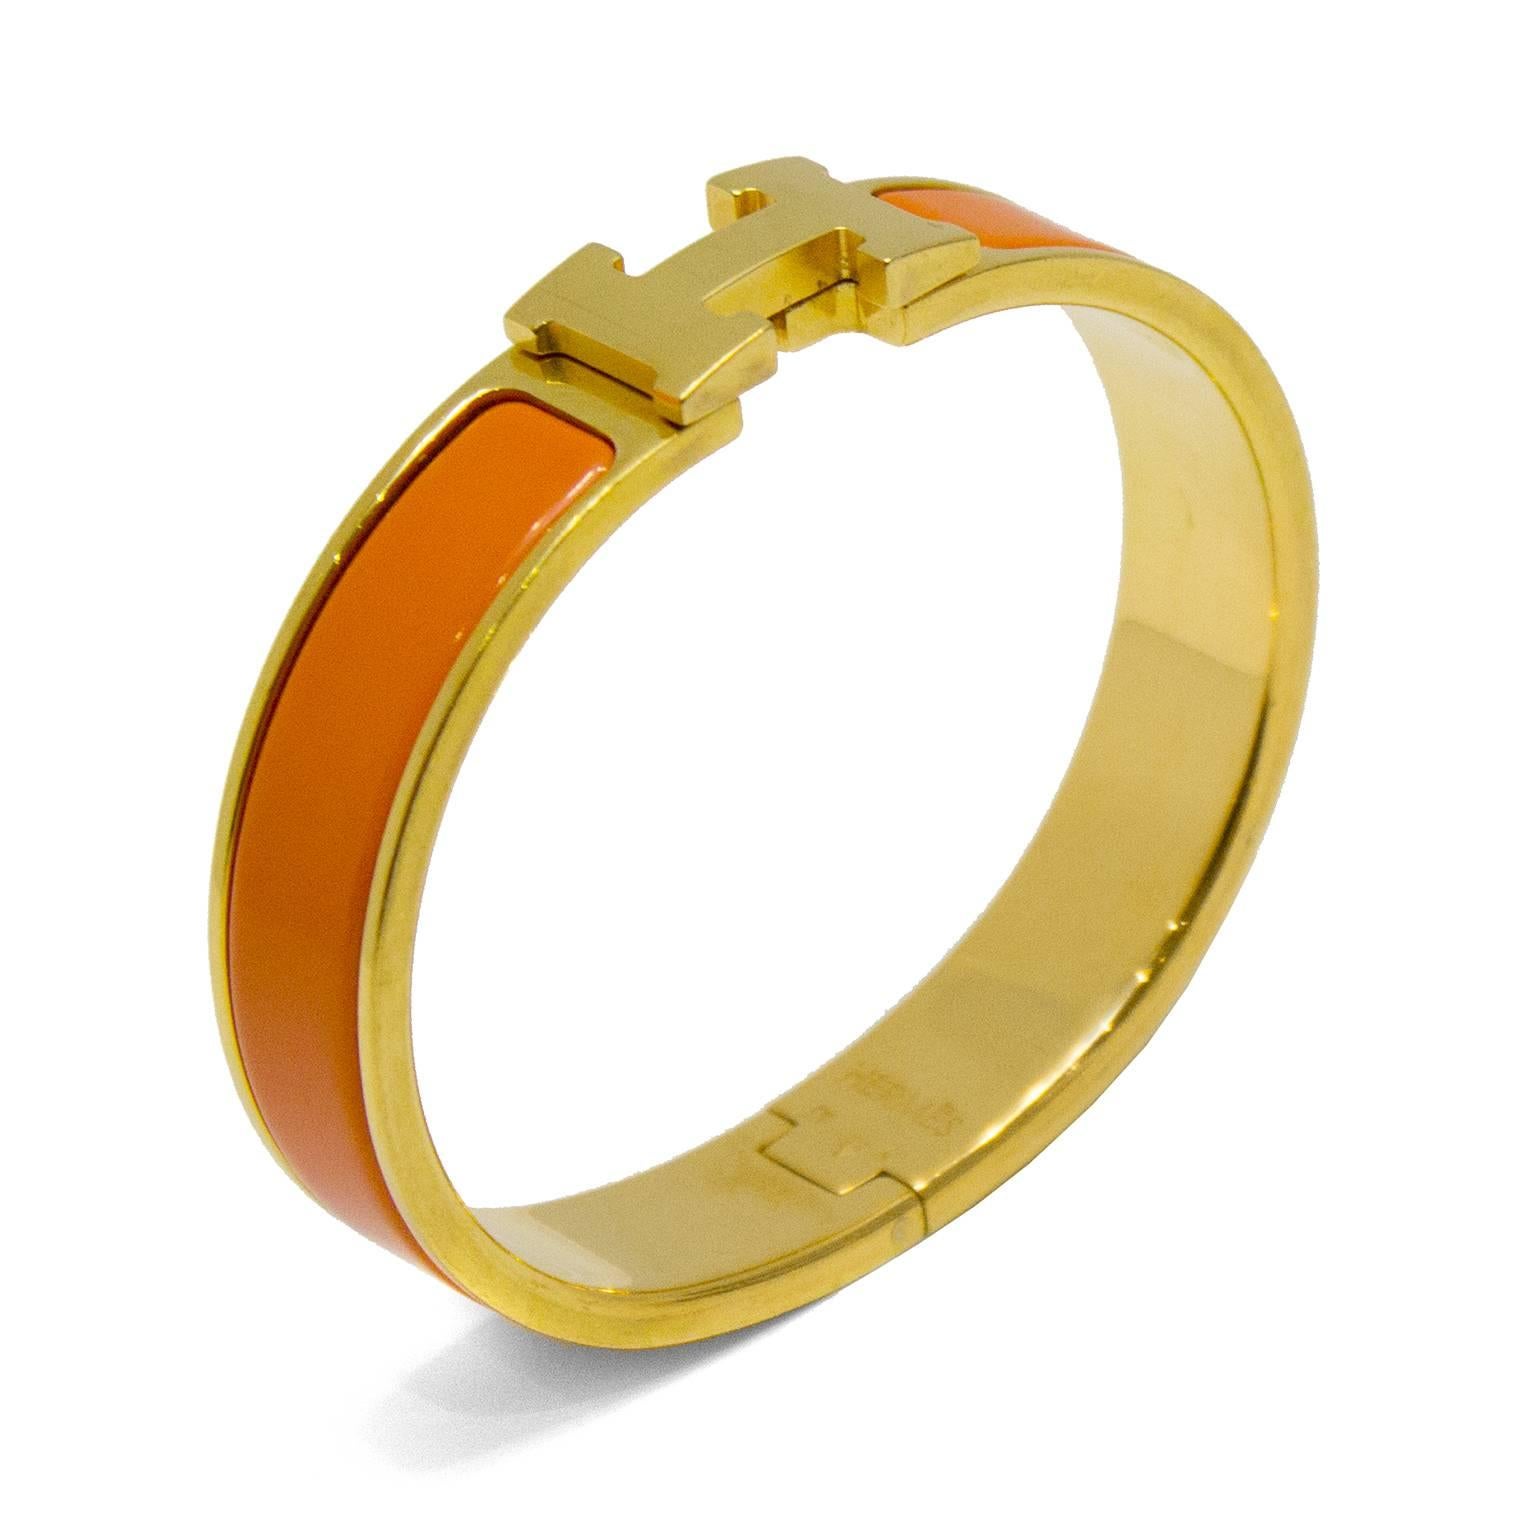 18K yellow gold-plated Hermès narrow Clic Clac H bracelet featuring bright orange enamel inlay with H turn lock closure. Stamped K from 2007. Excluding box and pouch. Fits a wrist size of 6.25